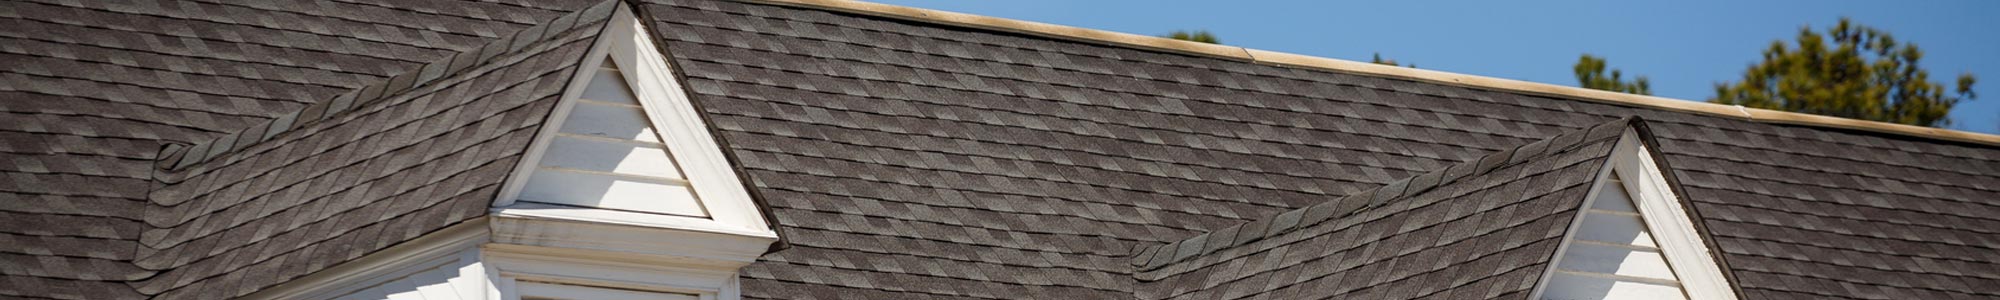 Commercial Roofing Professionals in Ohio